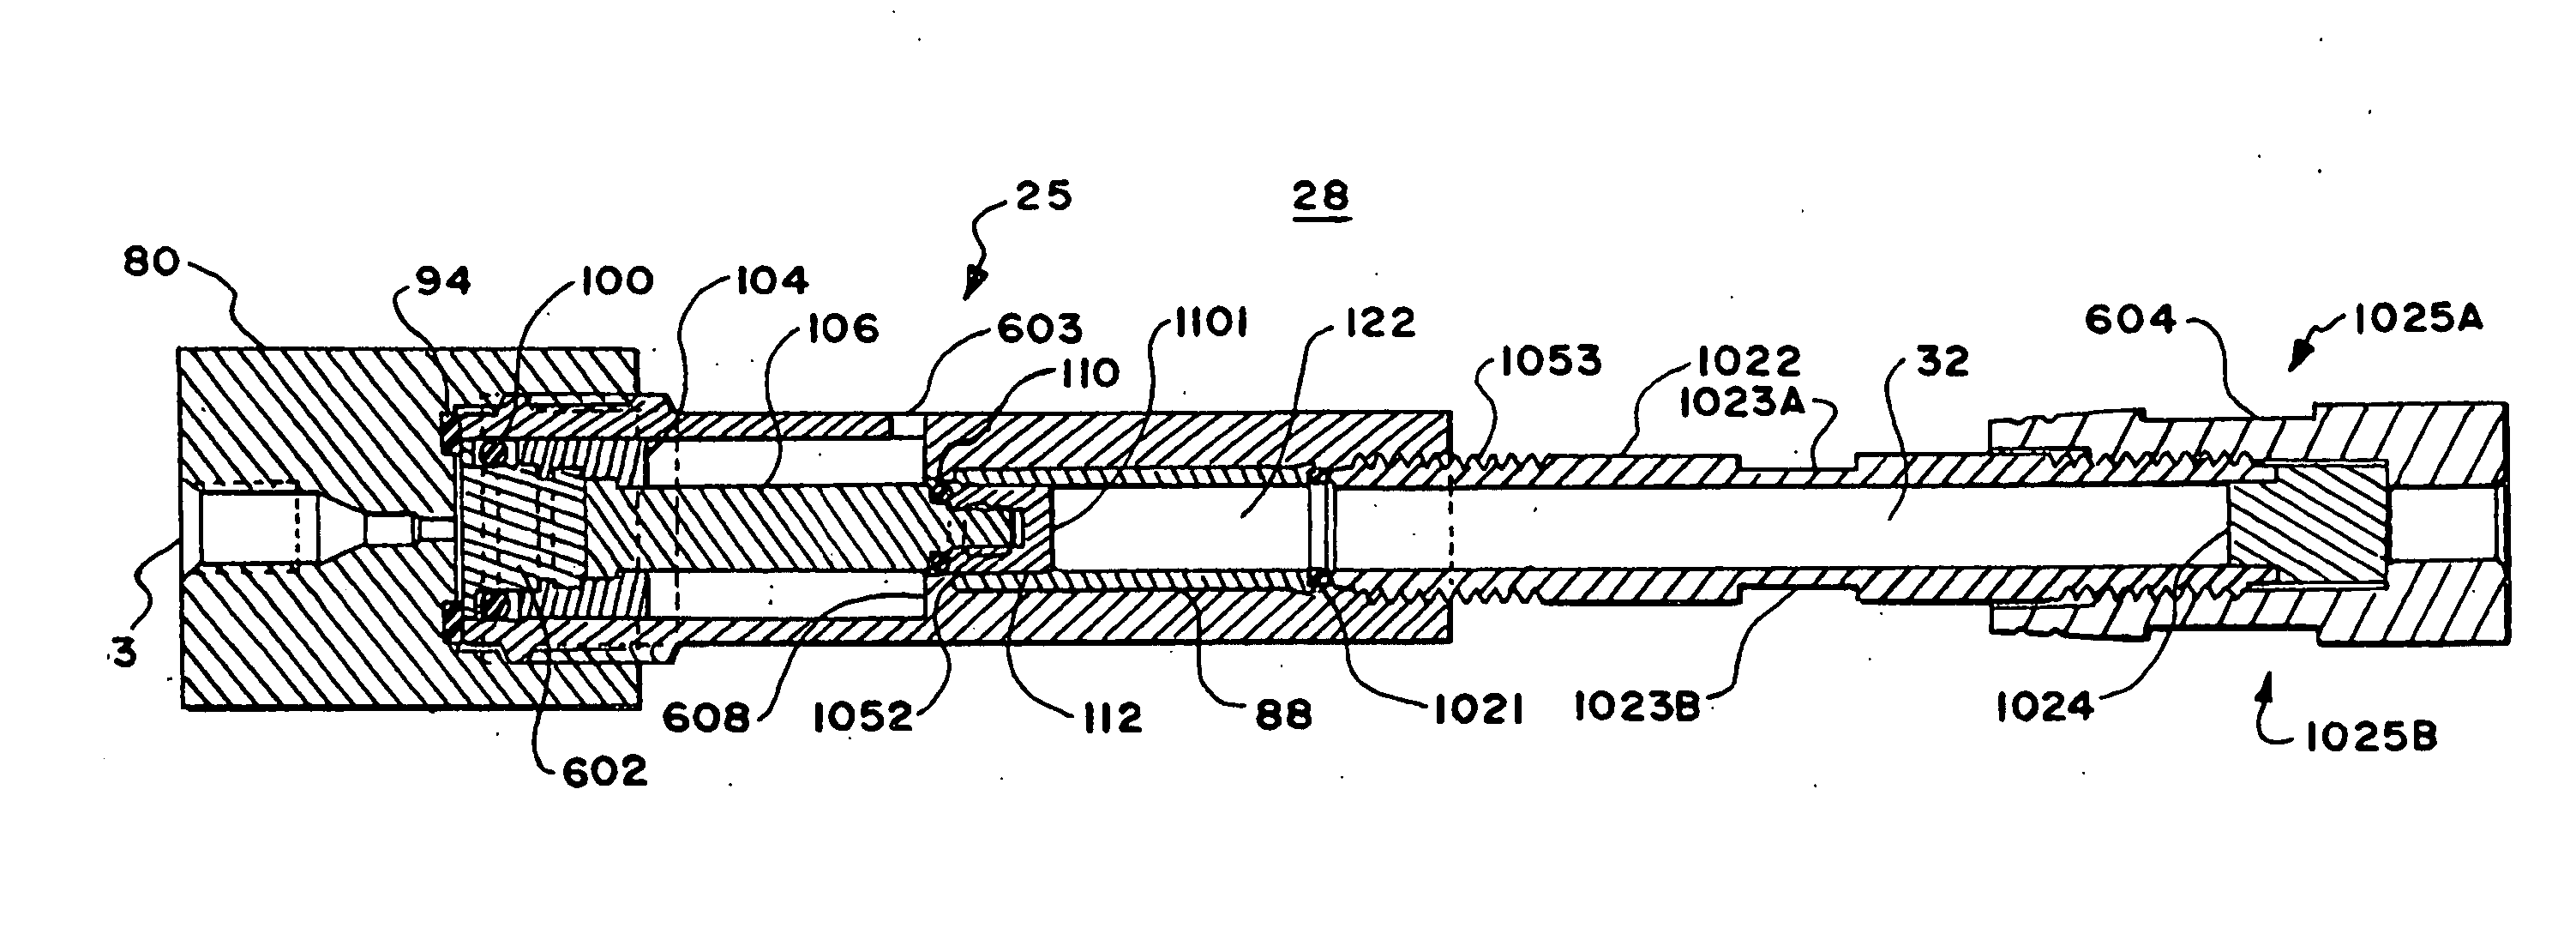 Separation system, components of a separation system and methods of making and using them